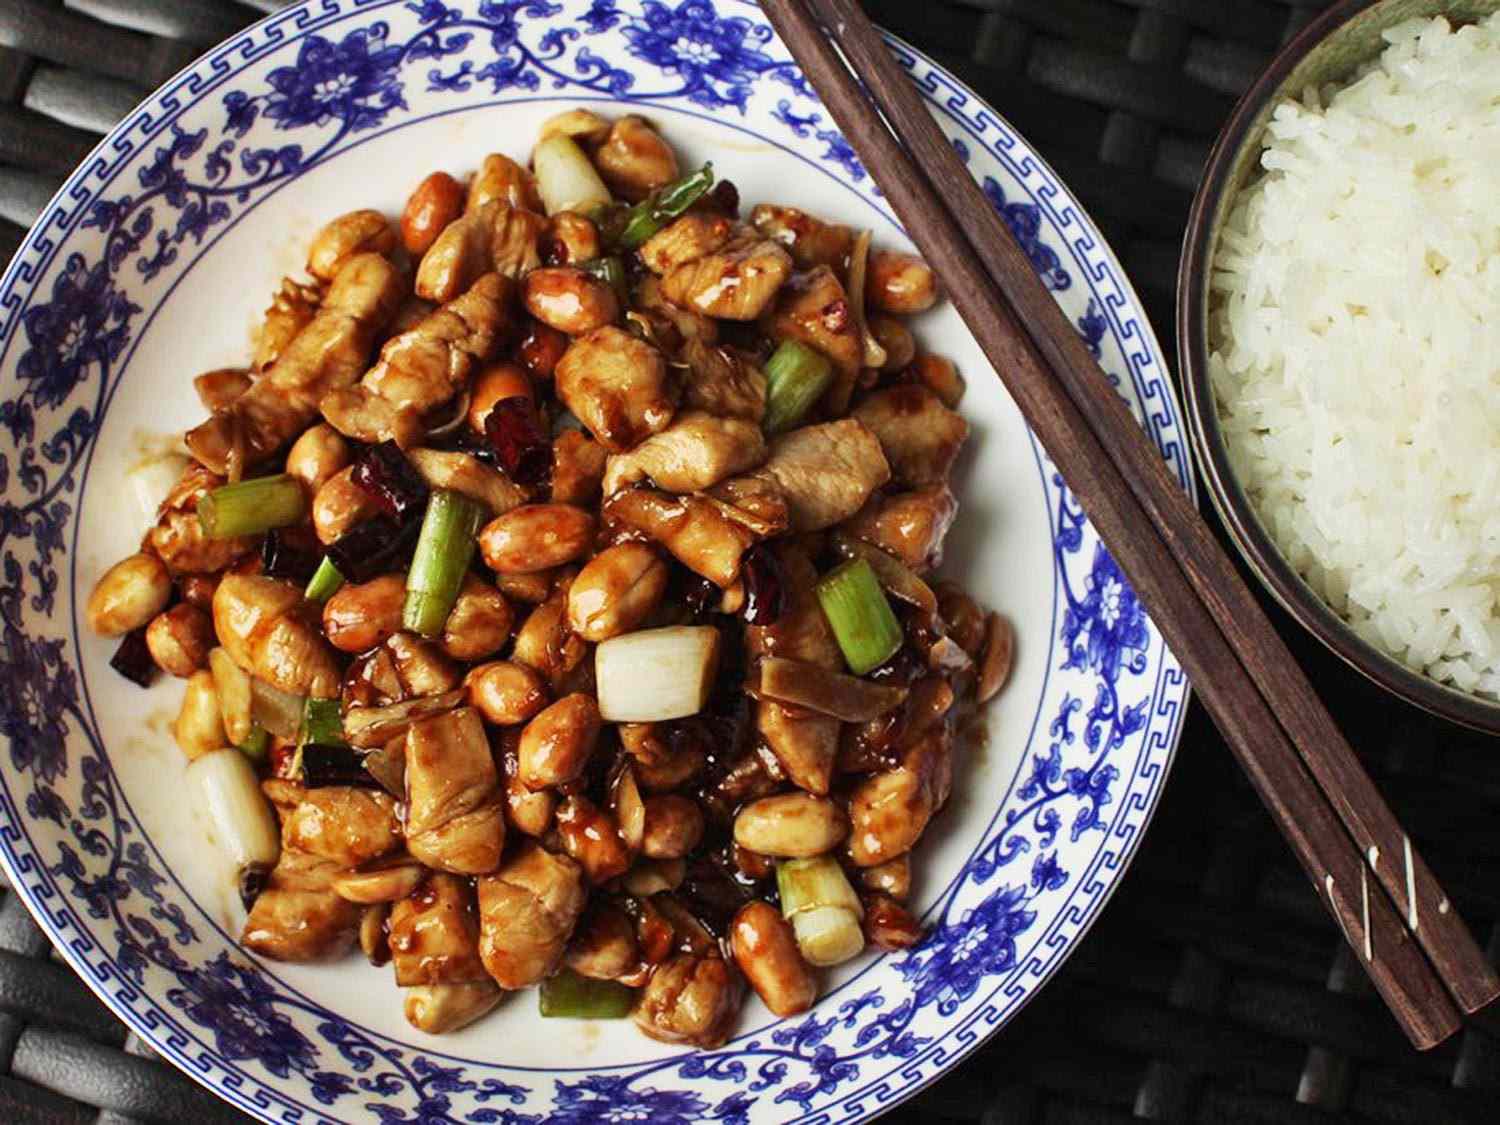 Kung pao chicken on serving plate.